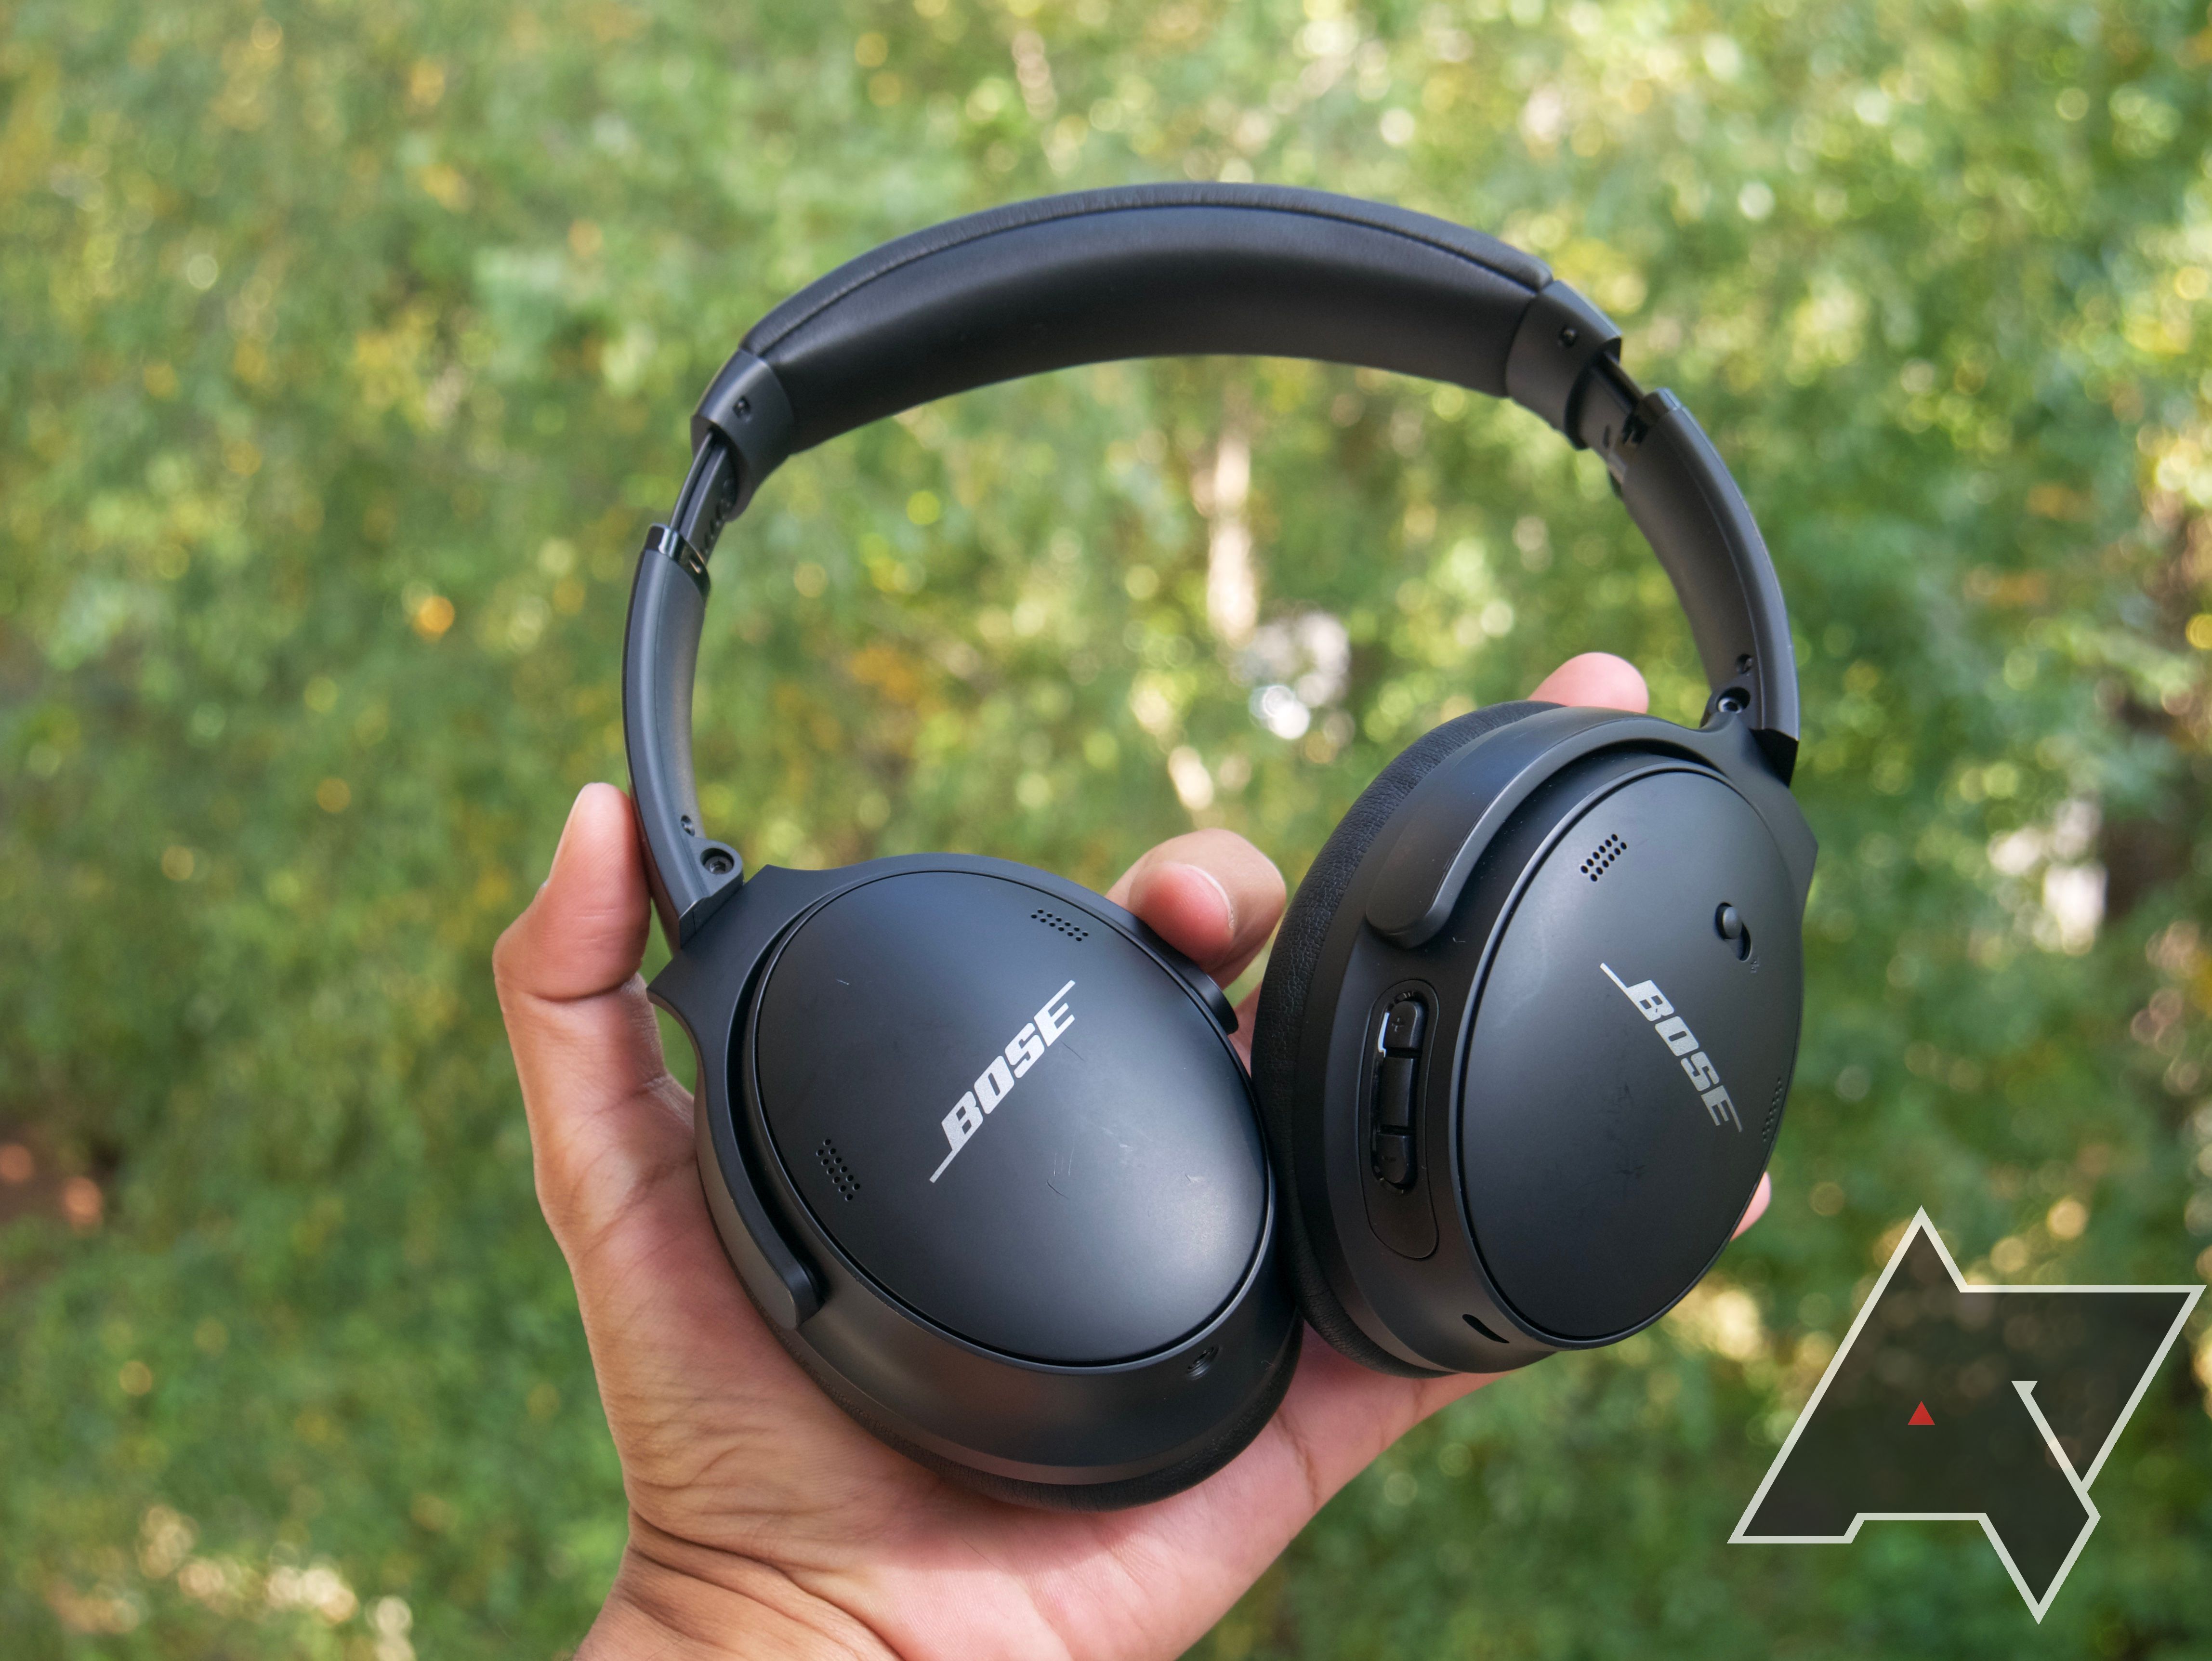 Bose aims to retake the ANC crown with the QuietComfort 45